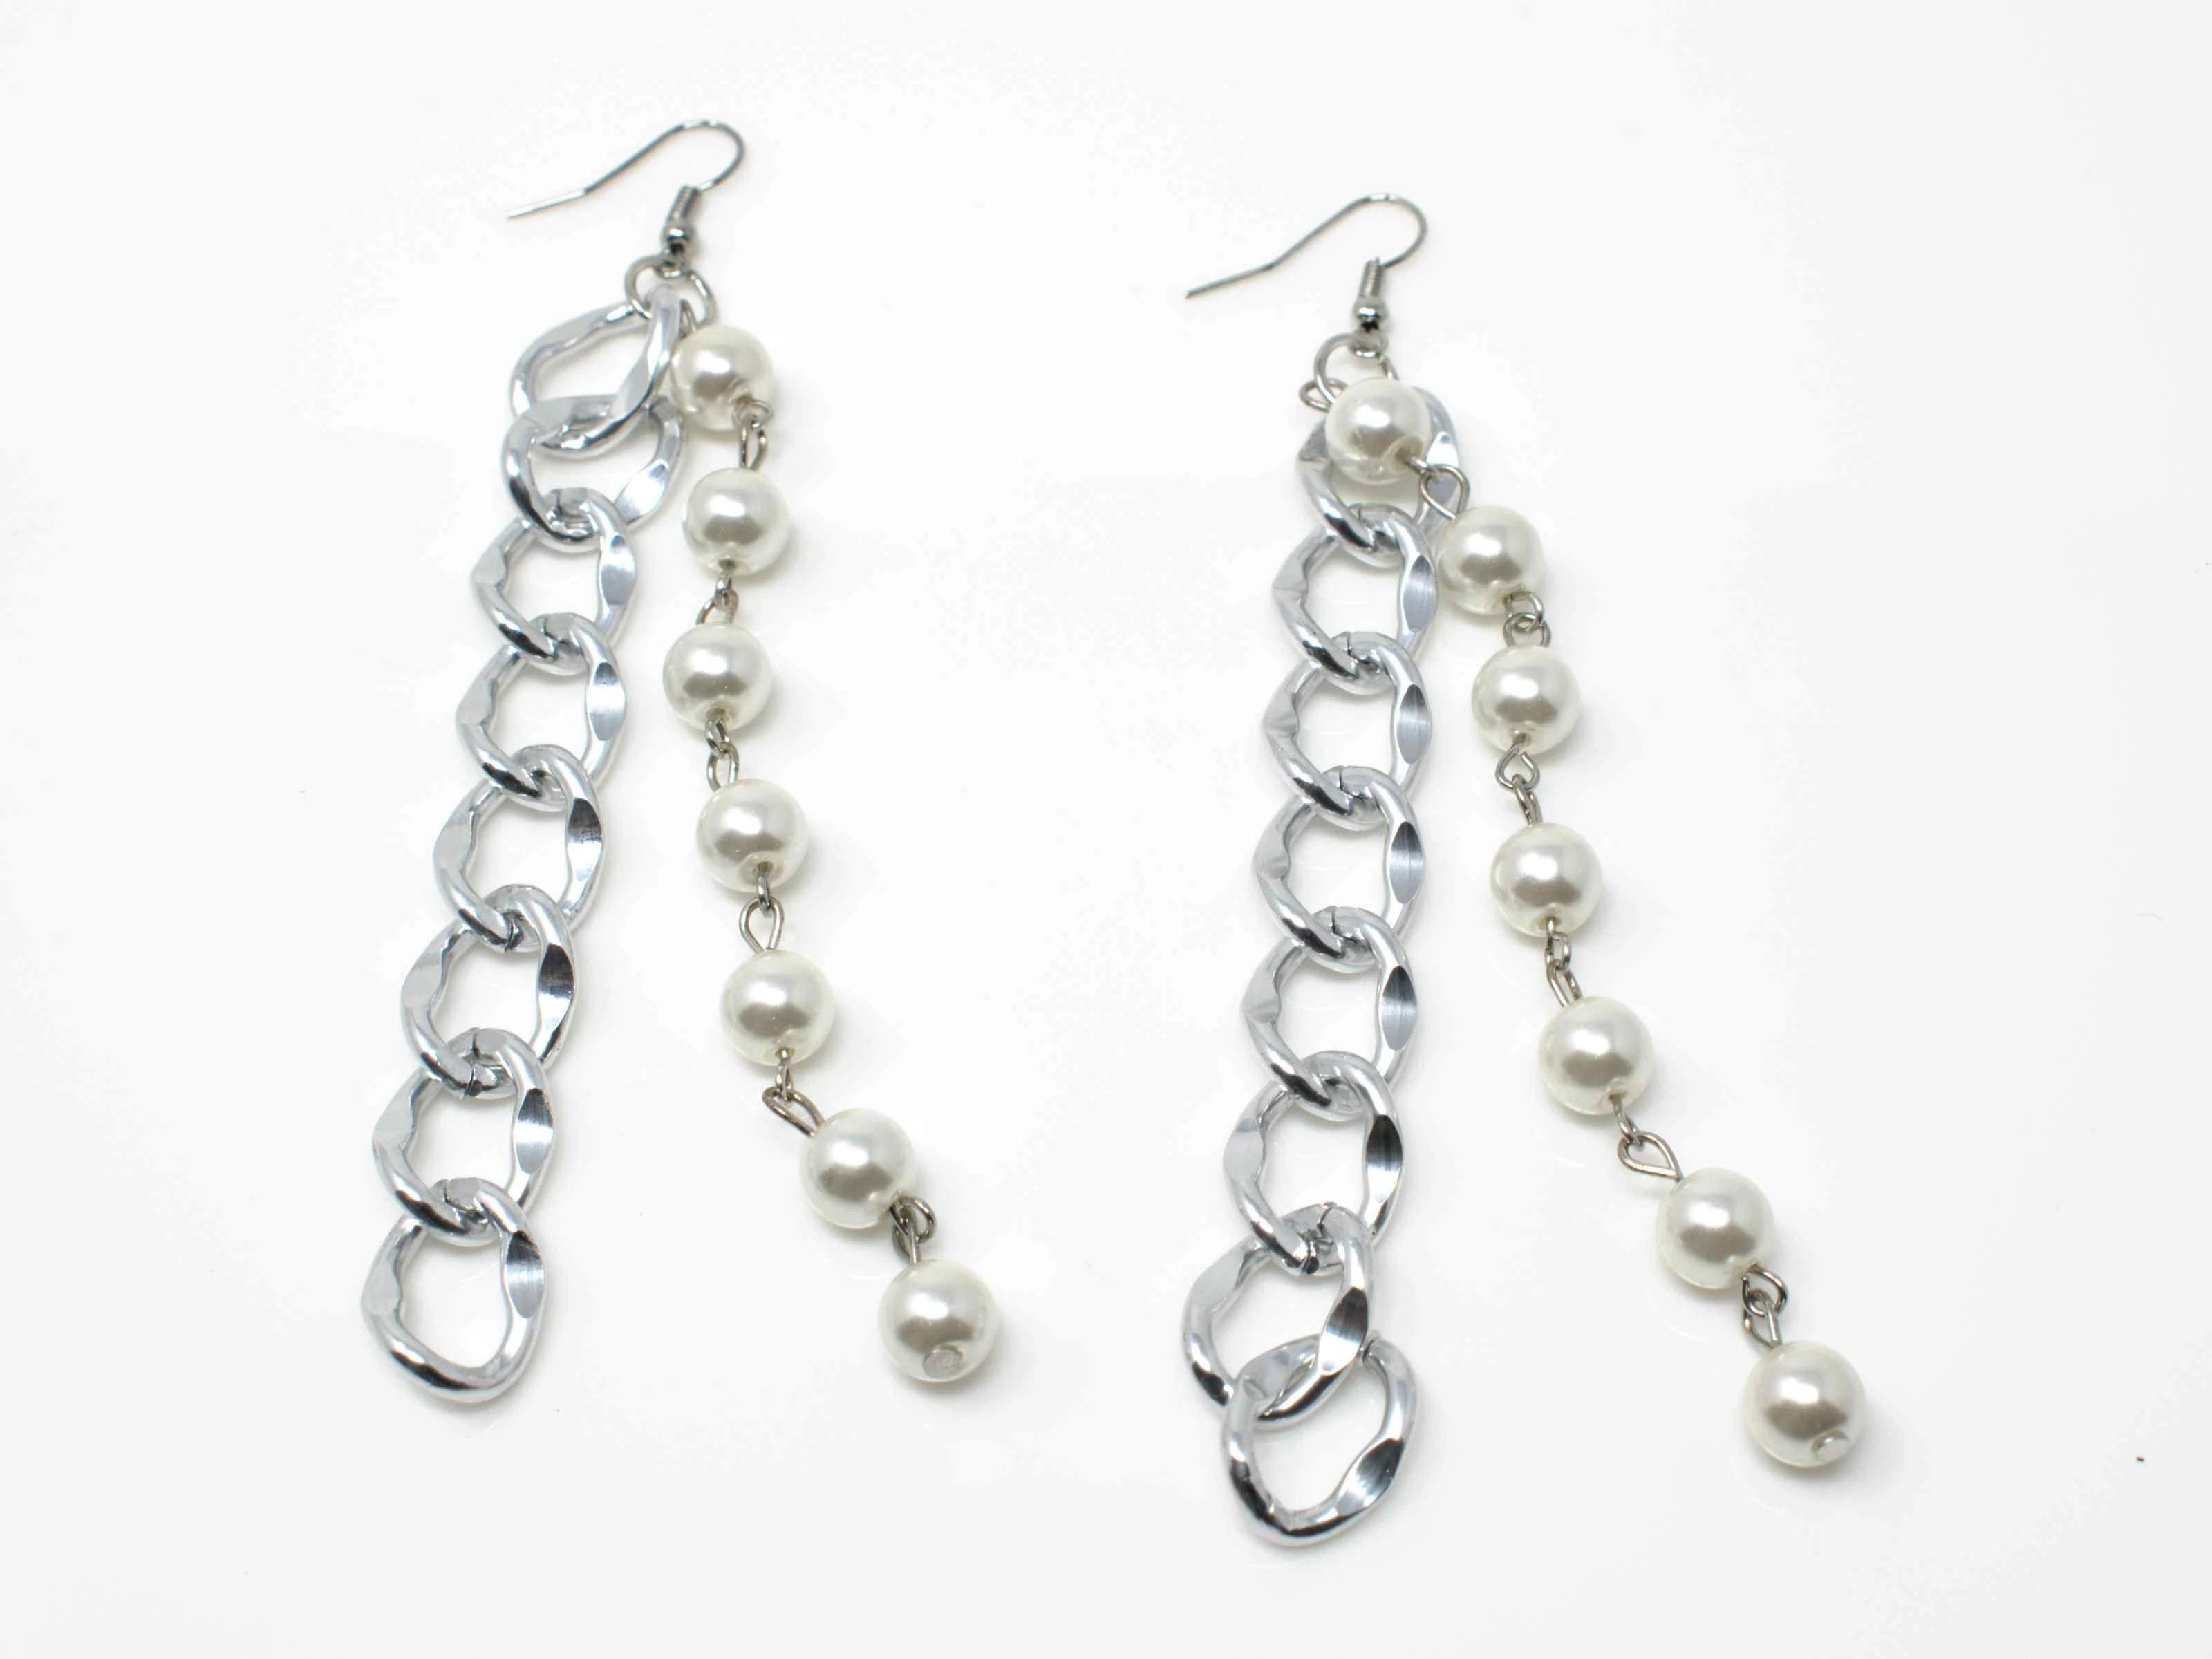 An elegant silver drop dangle earring with pearl accents and a fish hook clasp.